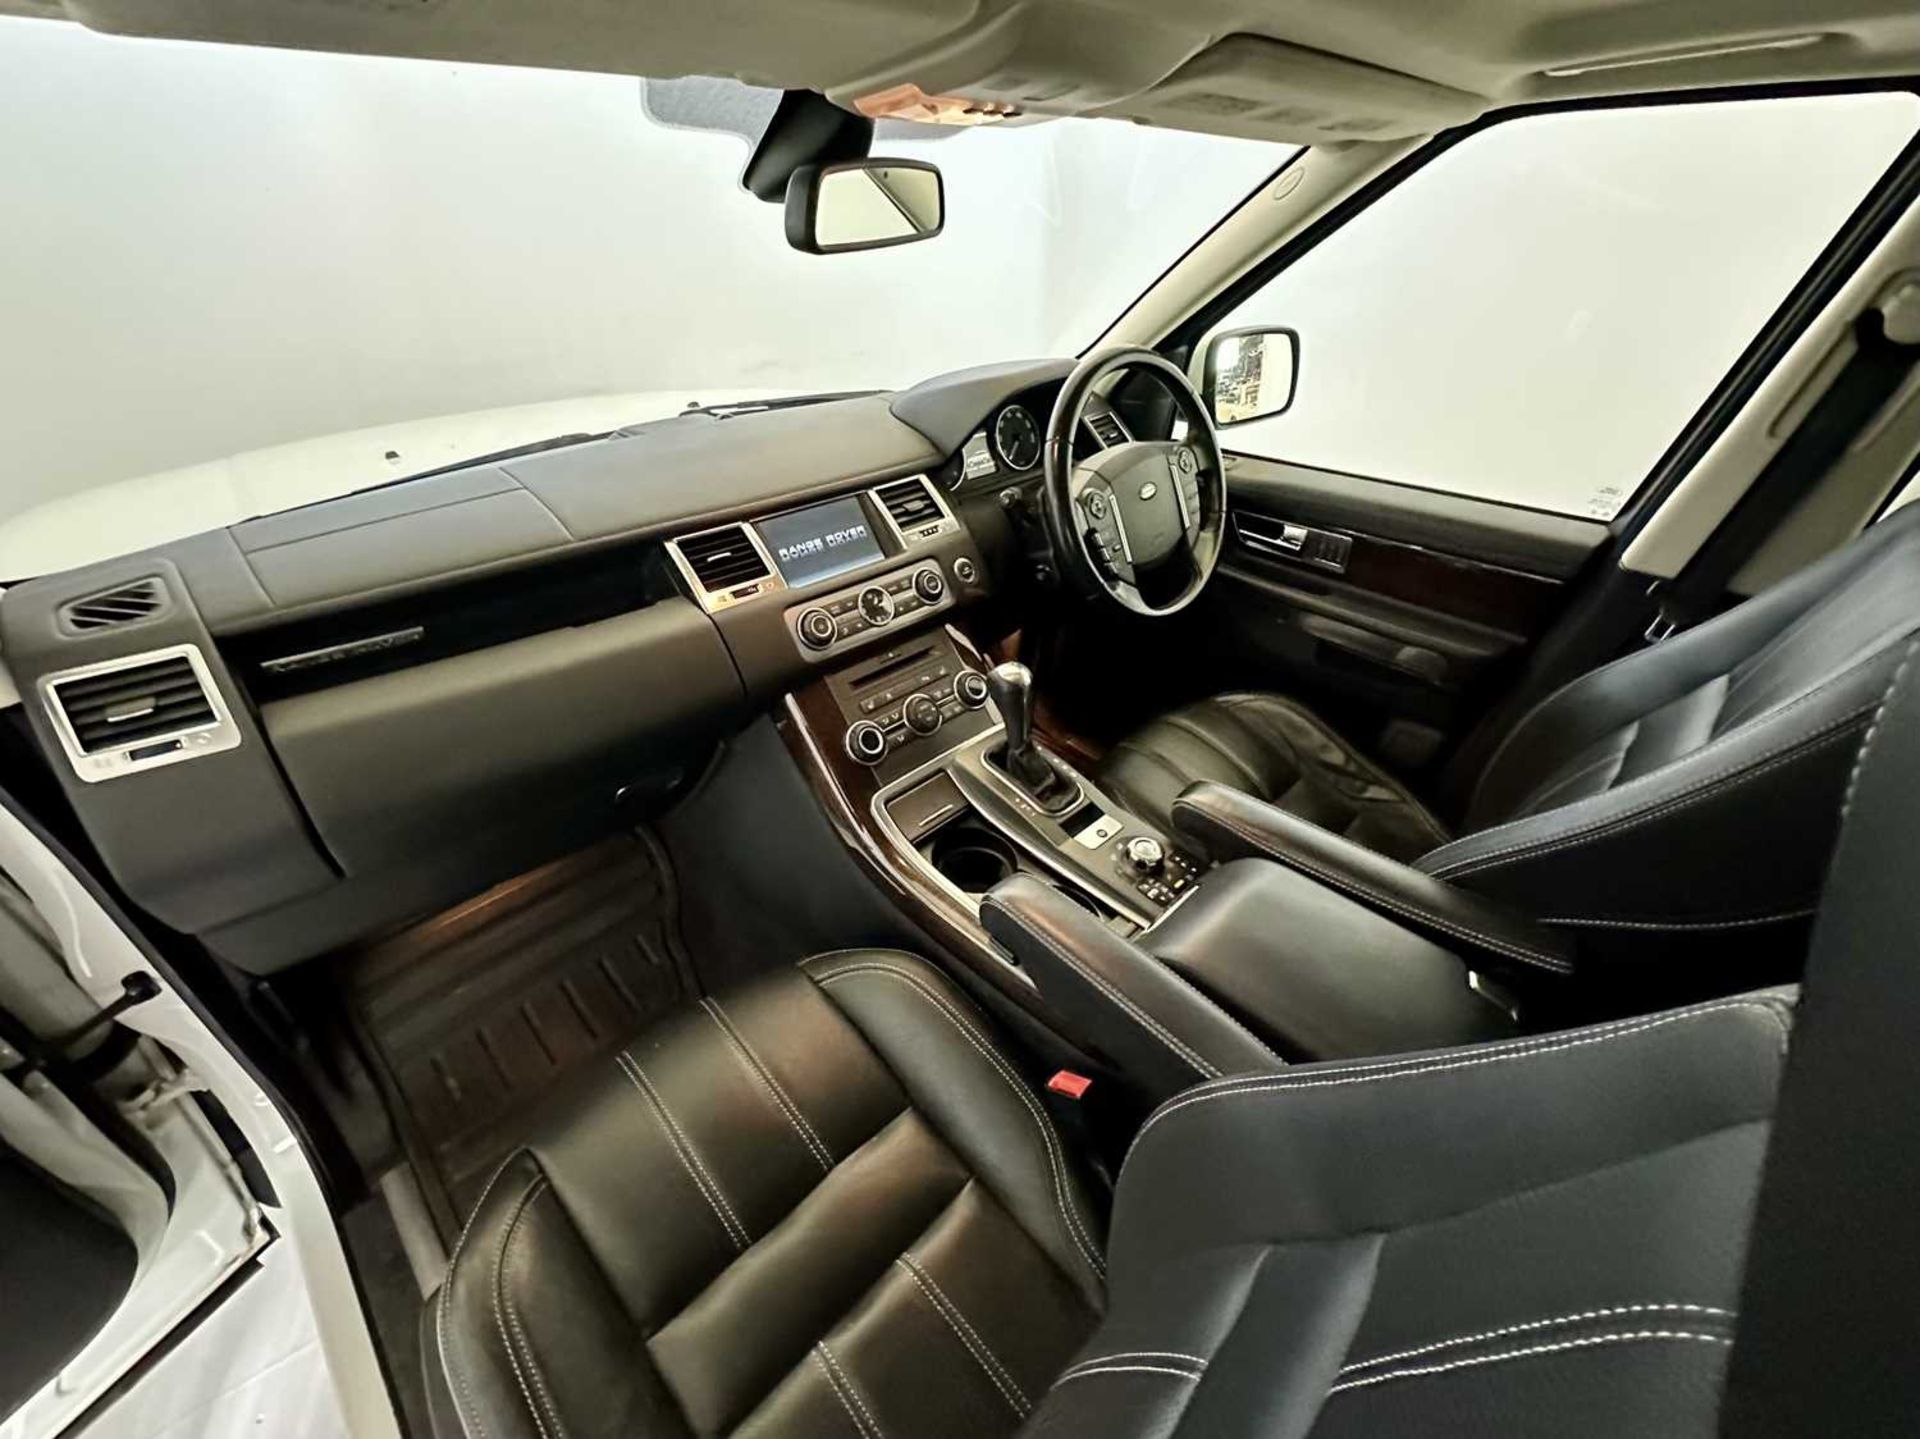 2010 Land Rover Range Rover Sport - Image 28 of 34